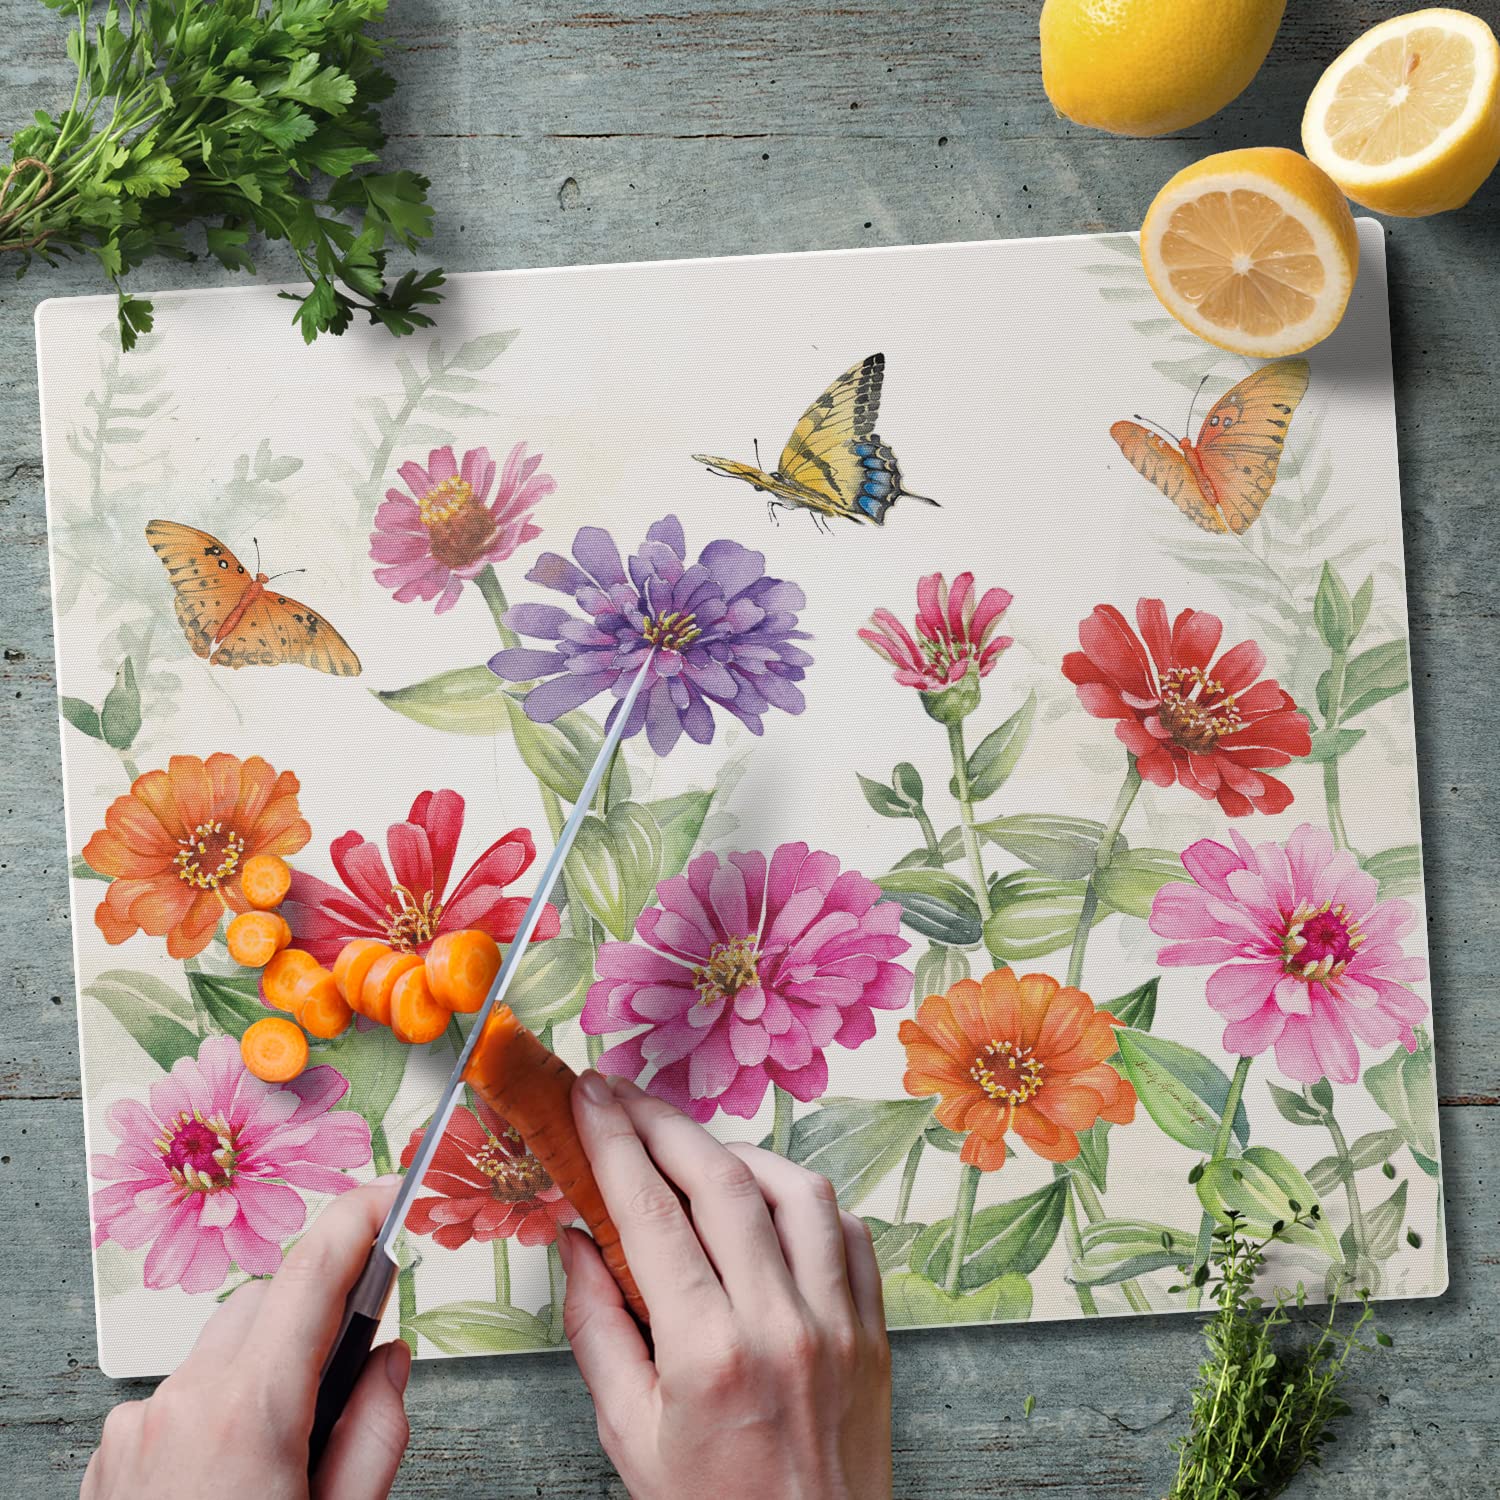 CounterArt Zinnias & Butterflies 3mm Heat Tolerant Tempered Glass Cutting Board 15” x 12” Manufactured in the USA Dishwasher Safe